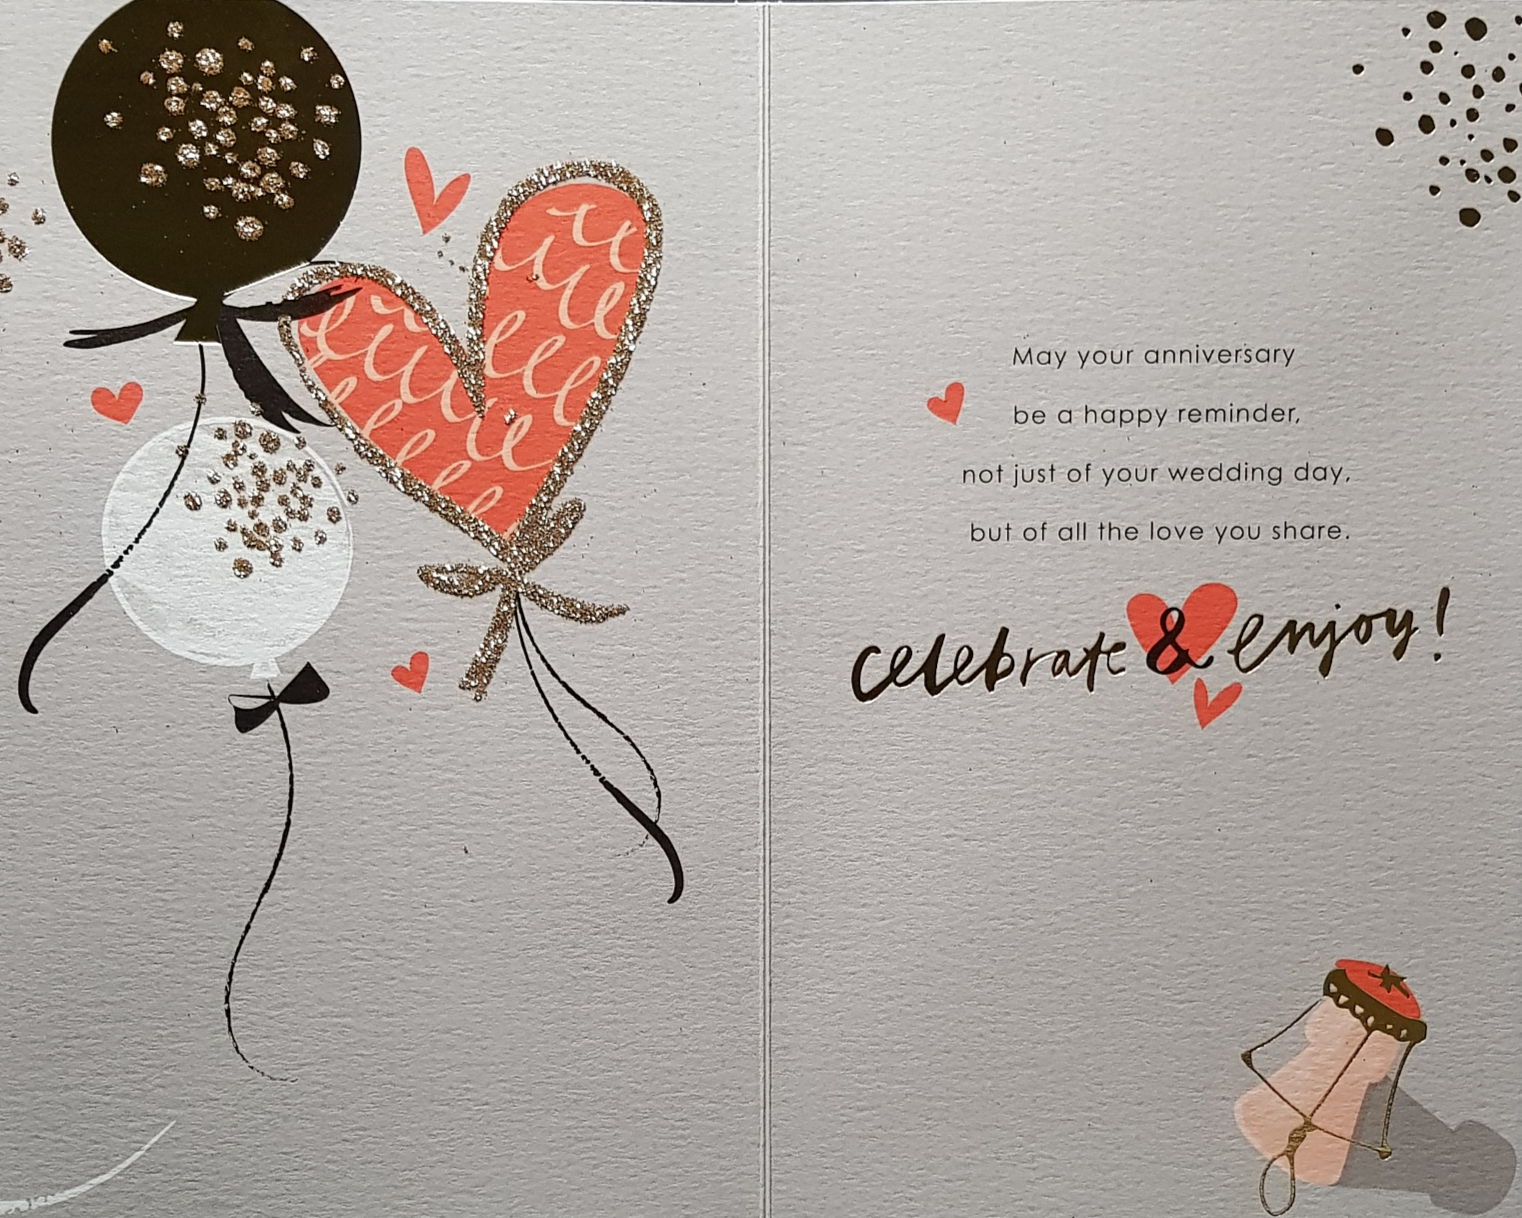 Anniversary Card - Special Friends / A Sparkly Gold Champagne Bottle With A Black Bow